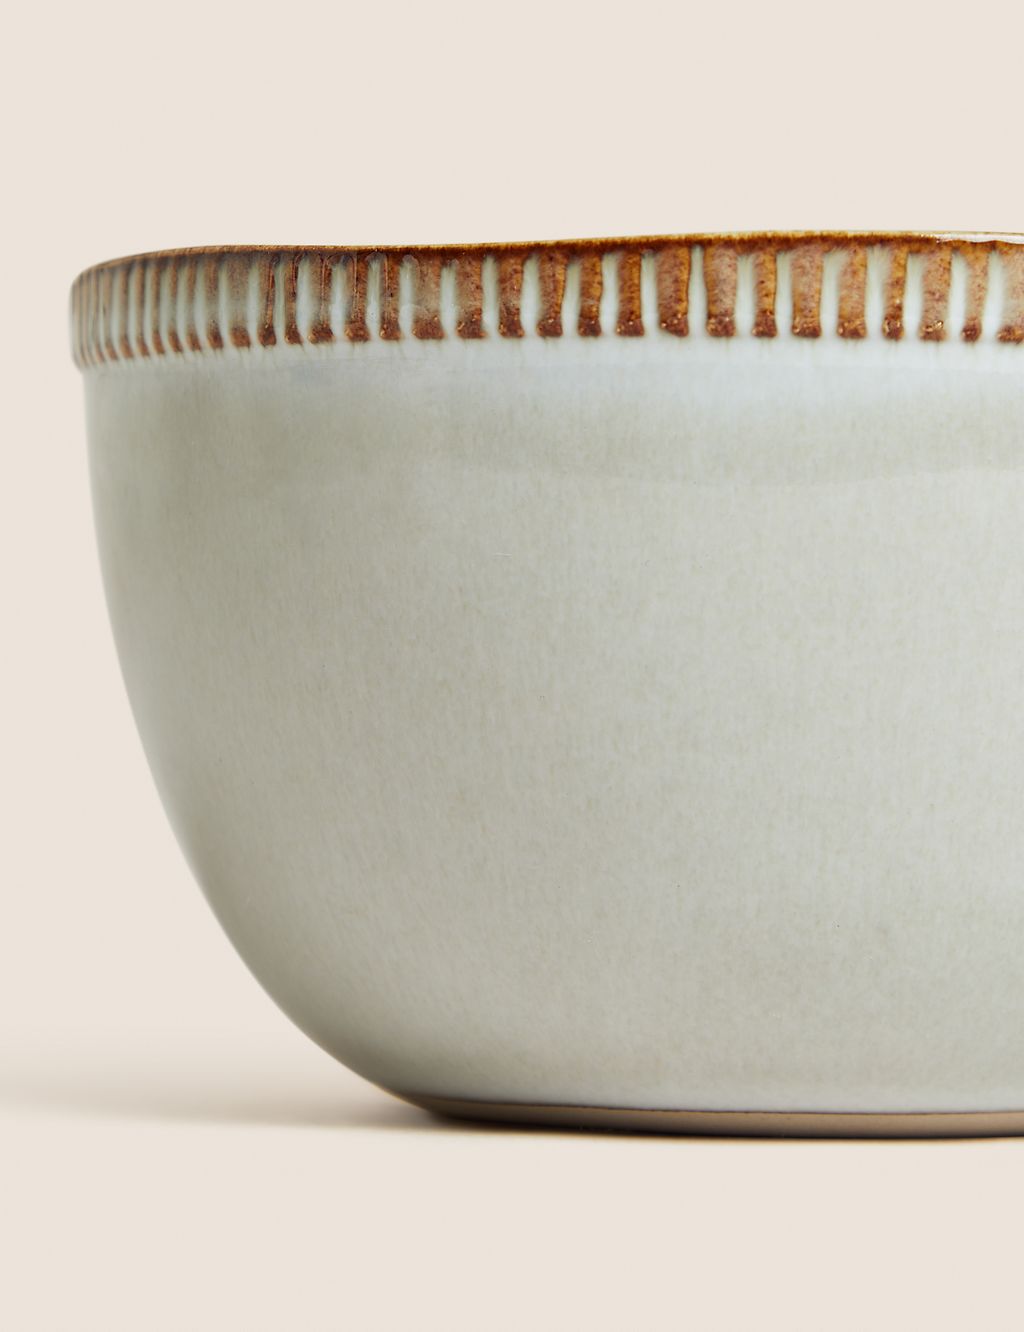 Stoneware Cereal Bowl 1 of 4